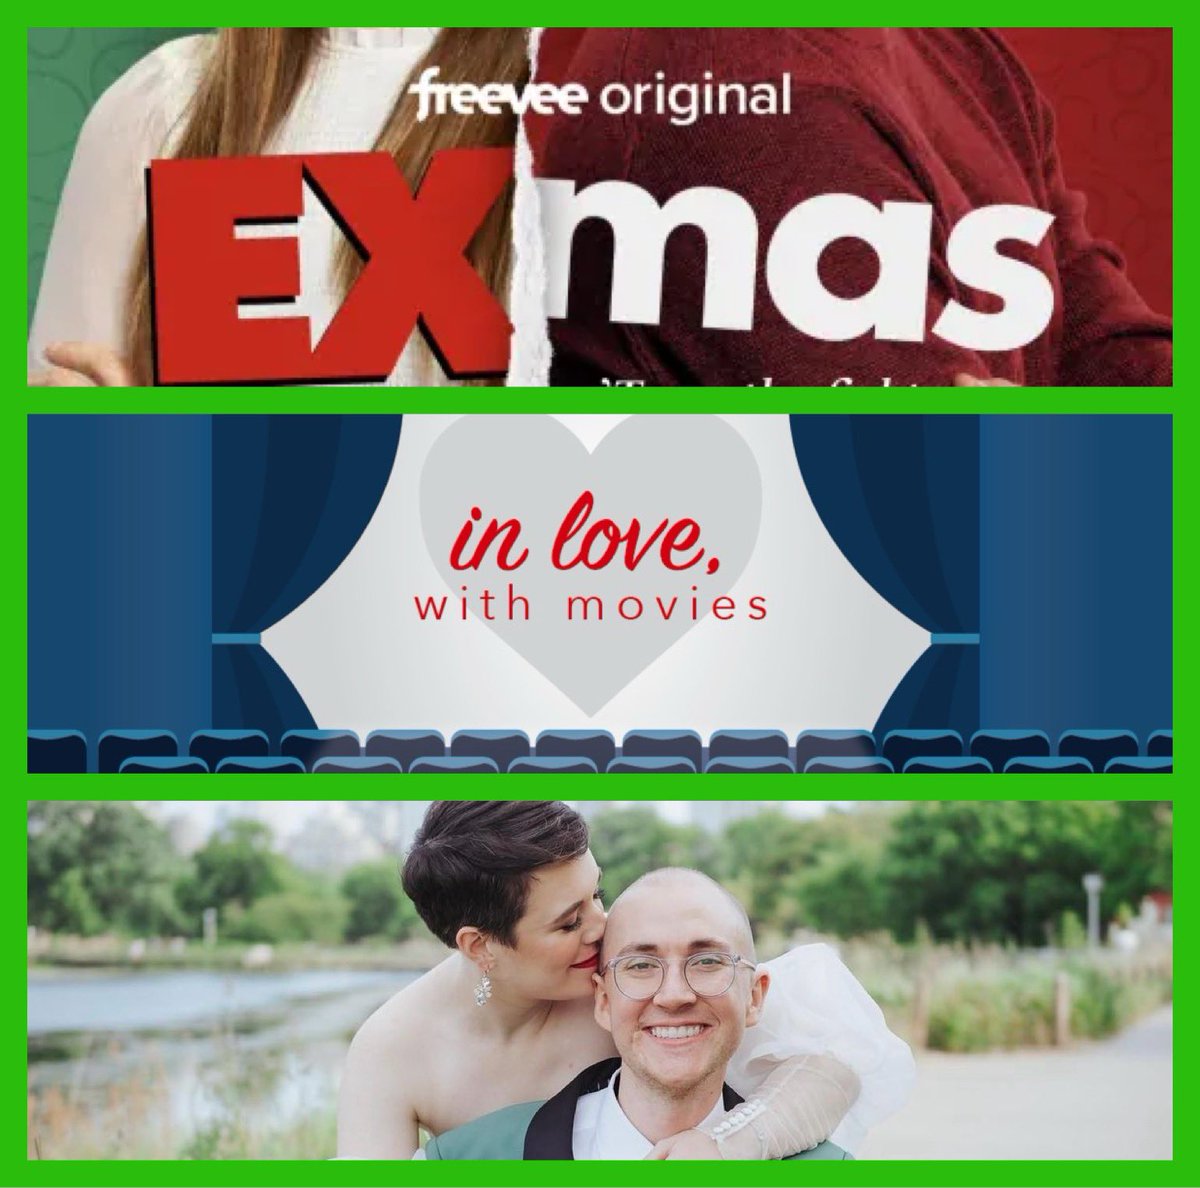 Joined again by @madmarlie & her (now) husband! Catch up w/ the Youngloves & kick off the #holidayseason w/ #EXmasmovie. (1st @NicLuvsMovies score drop!)
#movies #holidaymovies #loveandrelationships
🍎 apple.co/3N080PS
📺 bit.ly/3sSH8dK
🟢 spoti.fi/3GkF6Gw